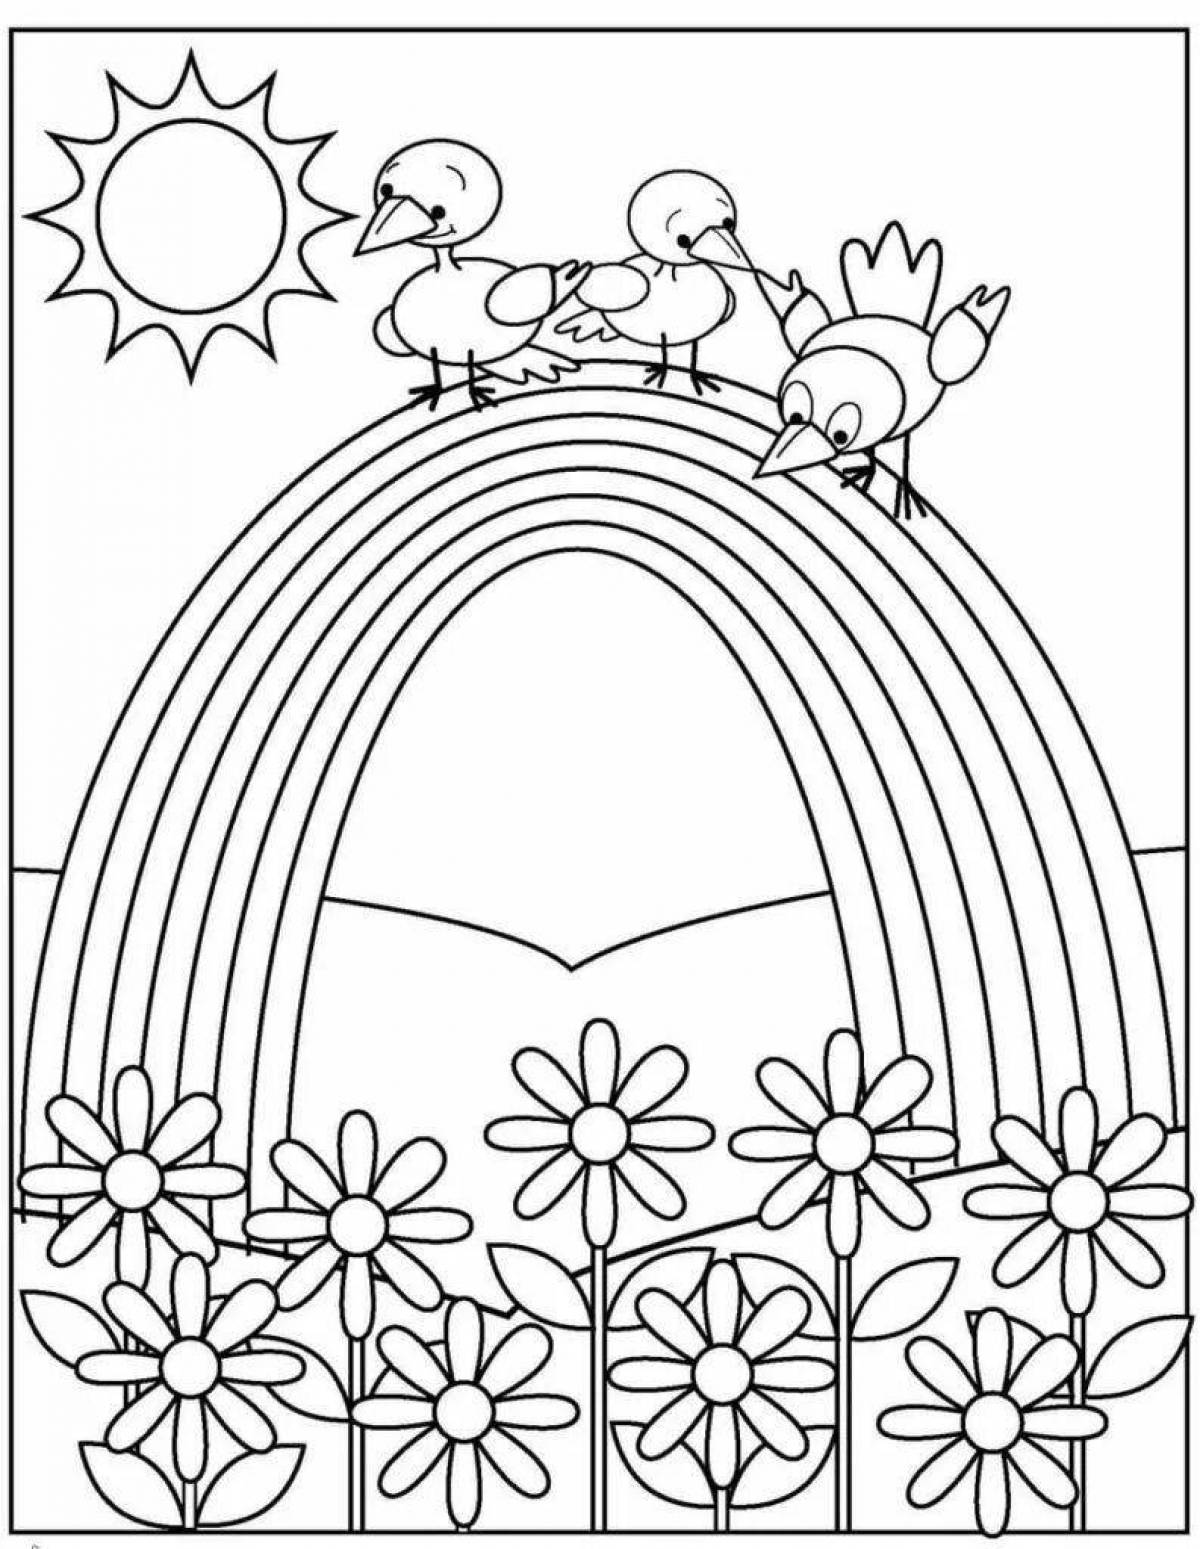 Fabulous rainbow house coloring page